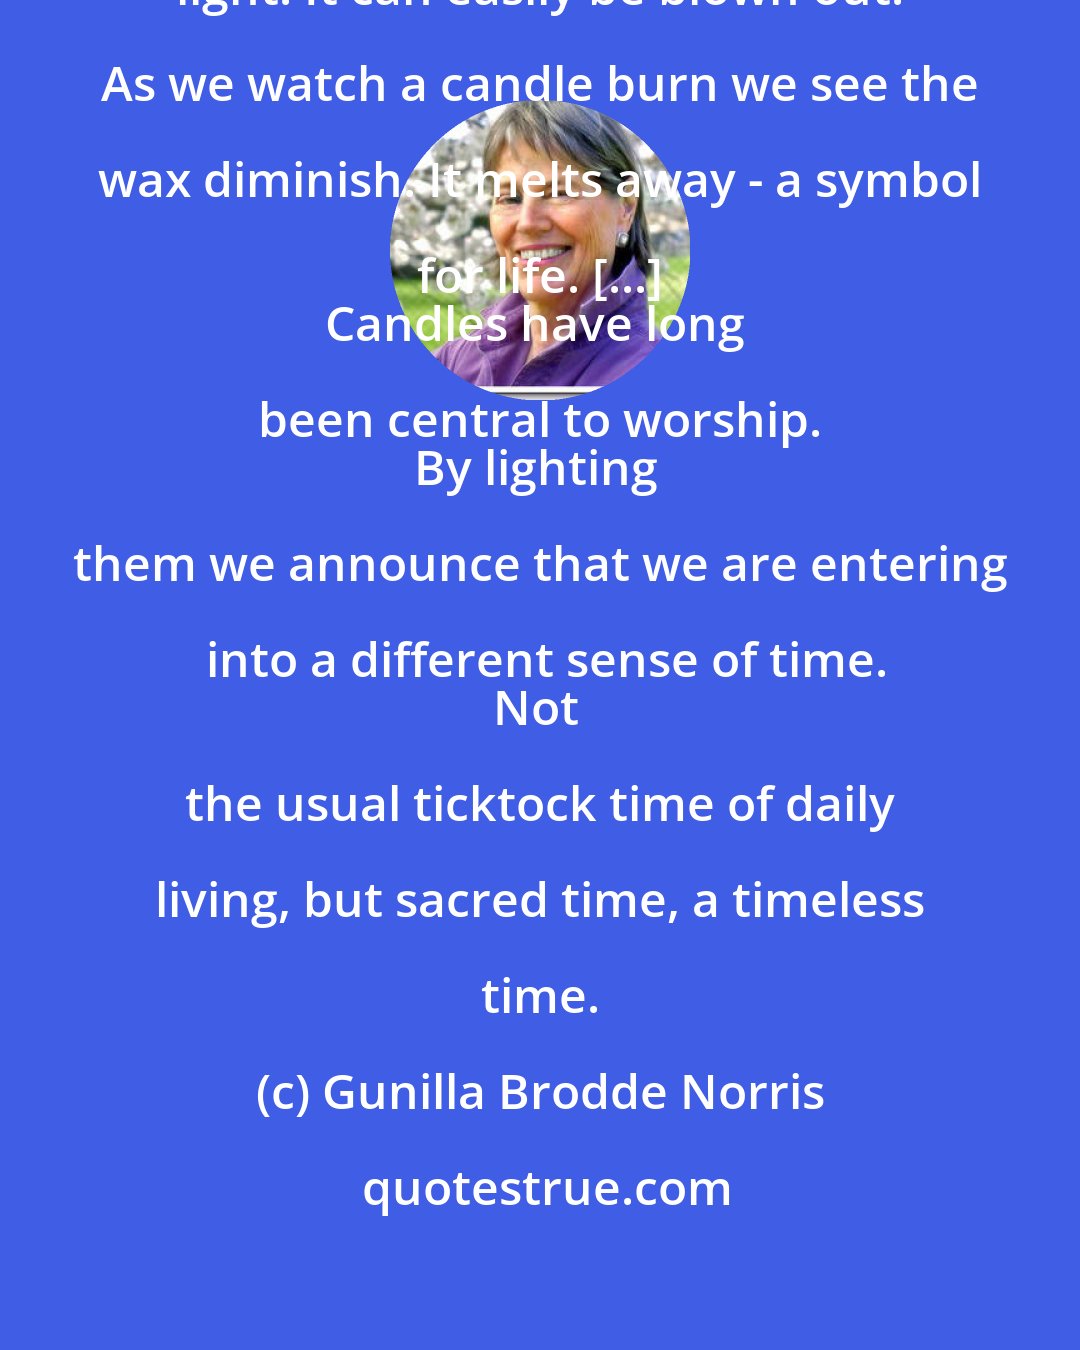 Gunilla Brodde Norris: A candle is a living, flickering light. It can easily be blown out. As we watch a candle burn we see the wax diminish. It melts away - a symbol for life. [...] 
Candles have long been central to worship. 
By lighting them we announce that we are entering into a different sense of time.
Not the usual ticktock time of daily living, but sacred time, a timeless time.